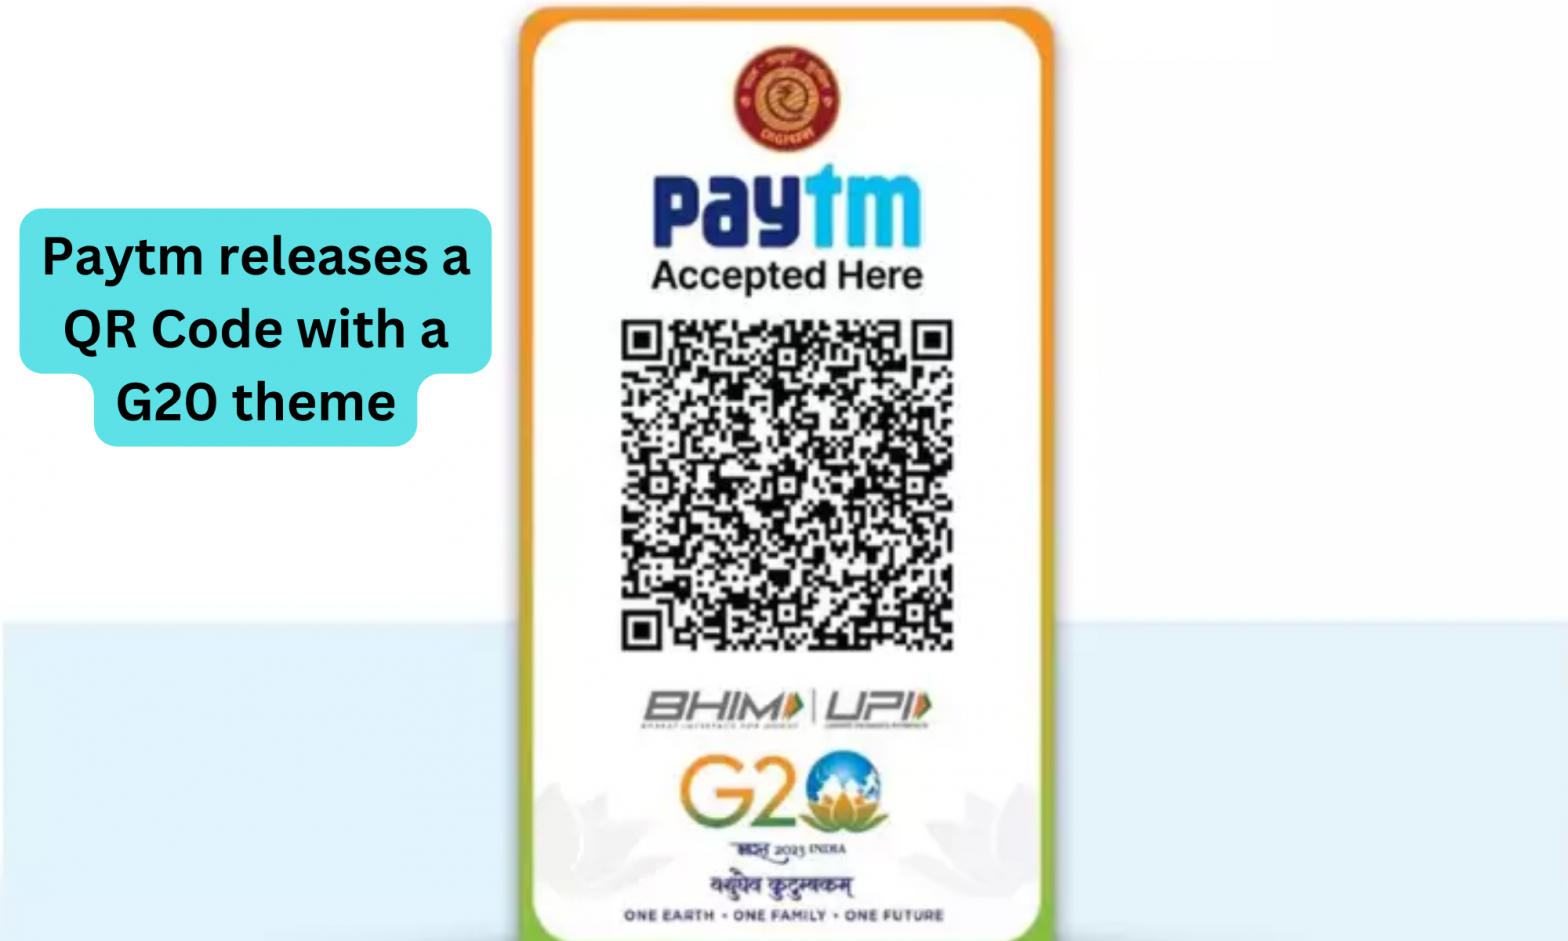 Paytm releases a QR Code with a G20 theme